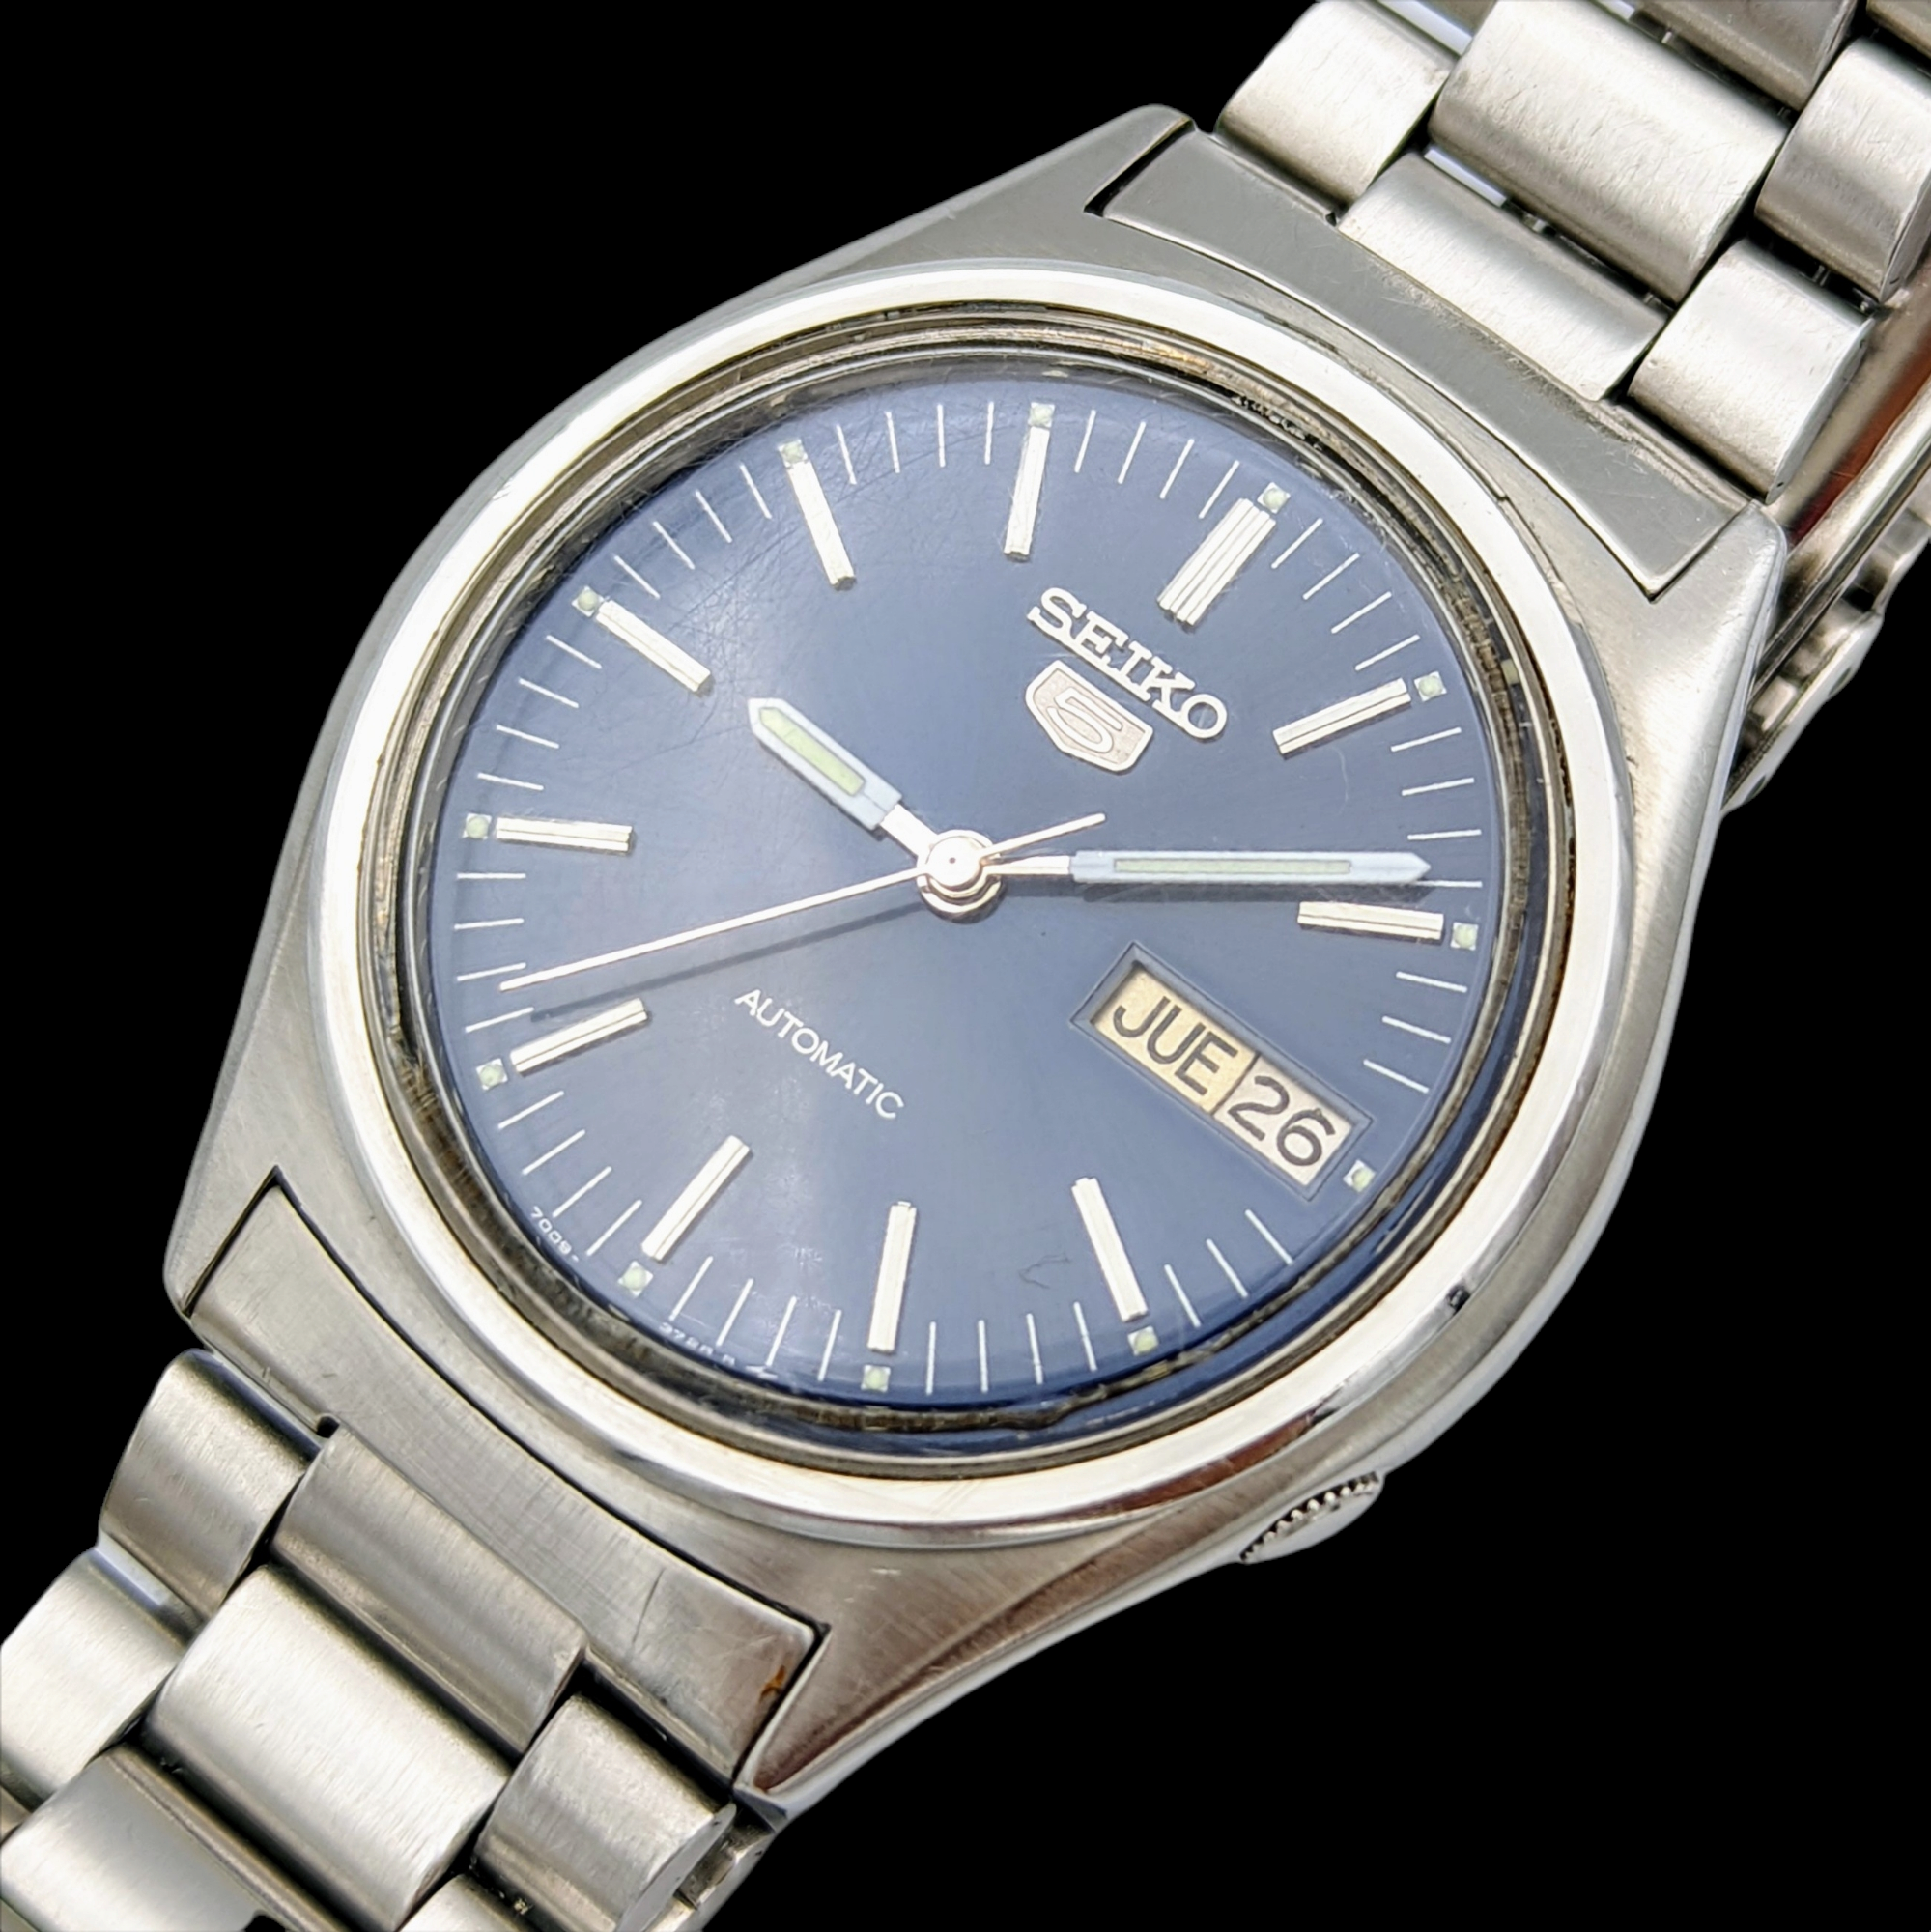 1985 SEIKO 5 Automatic Watch Day/Date Indicator – SECOND HAND HOROLOGY